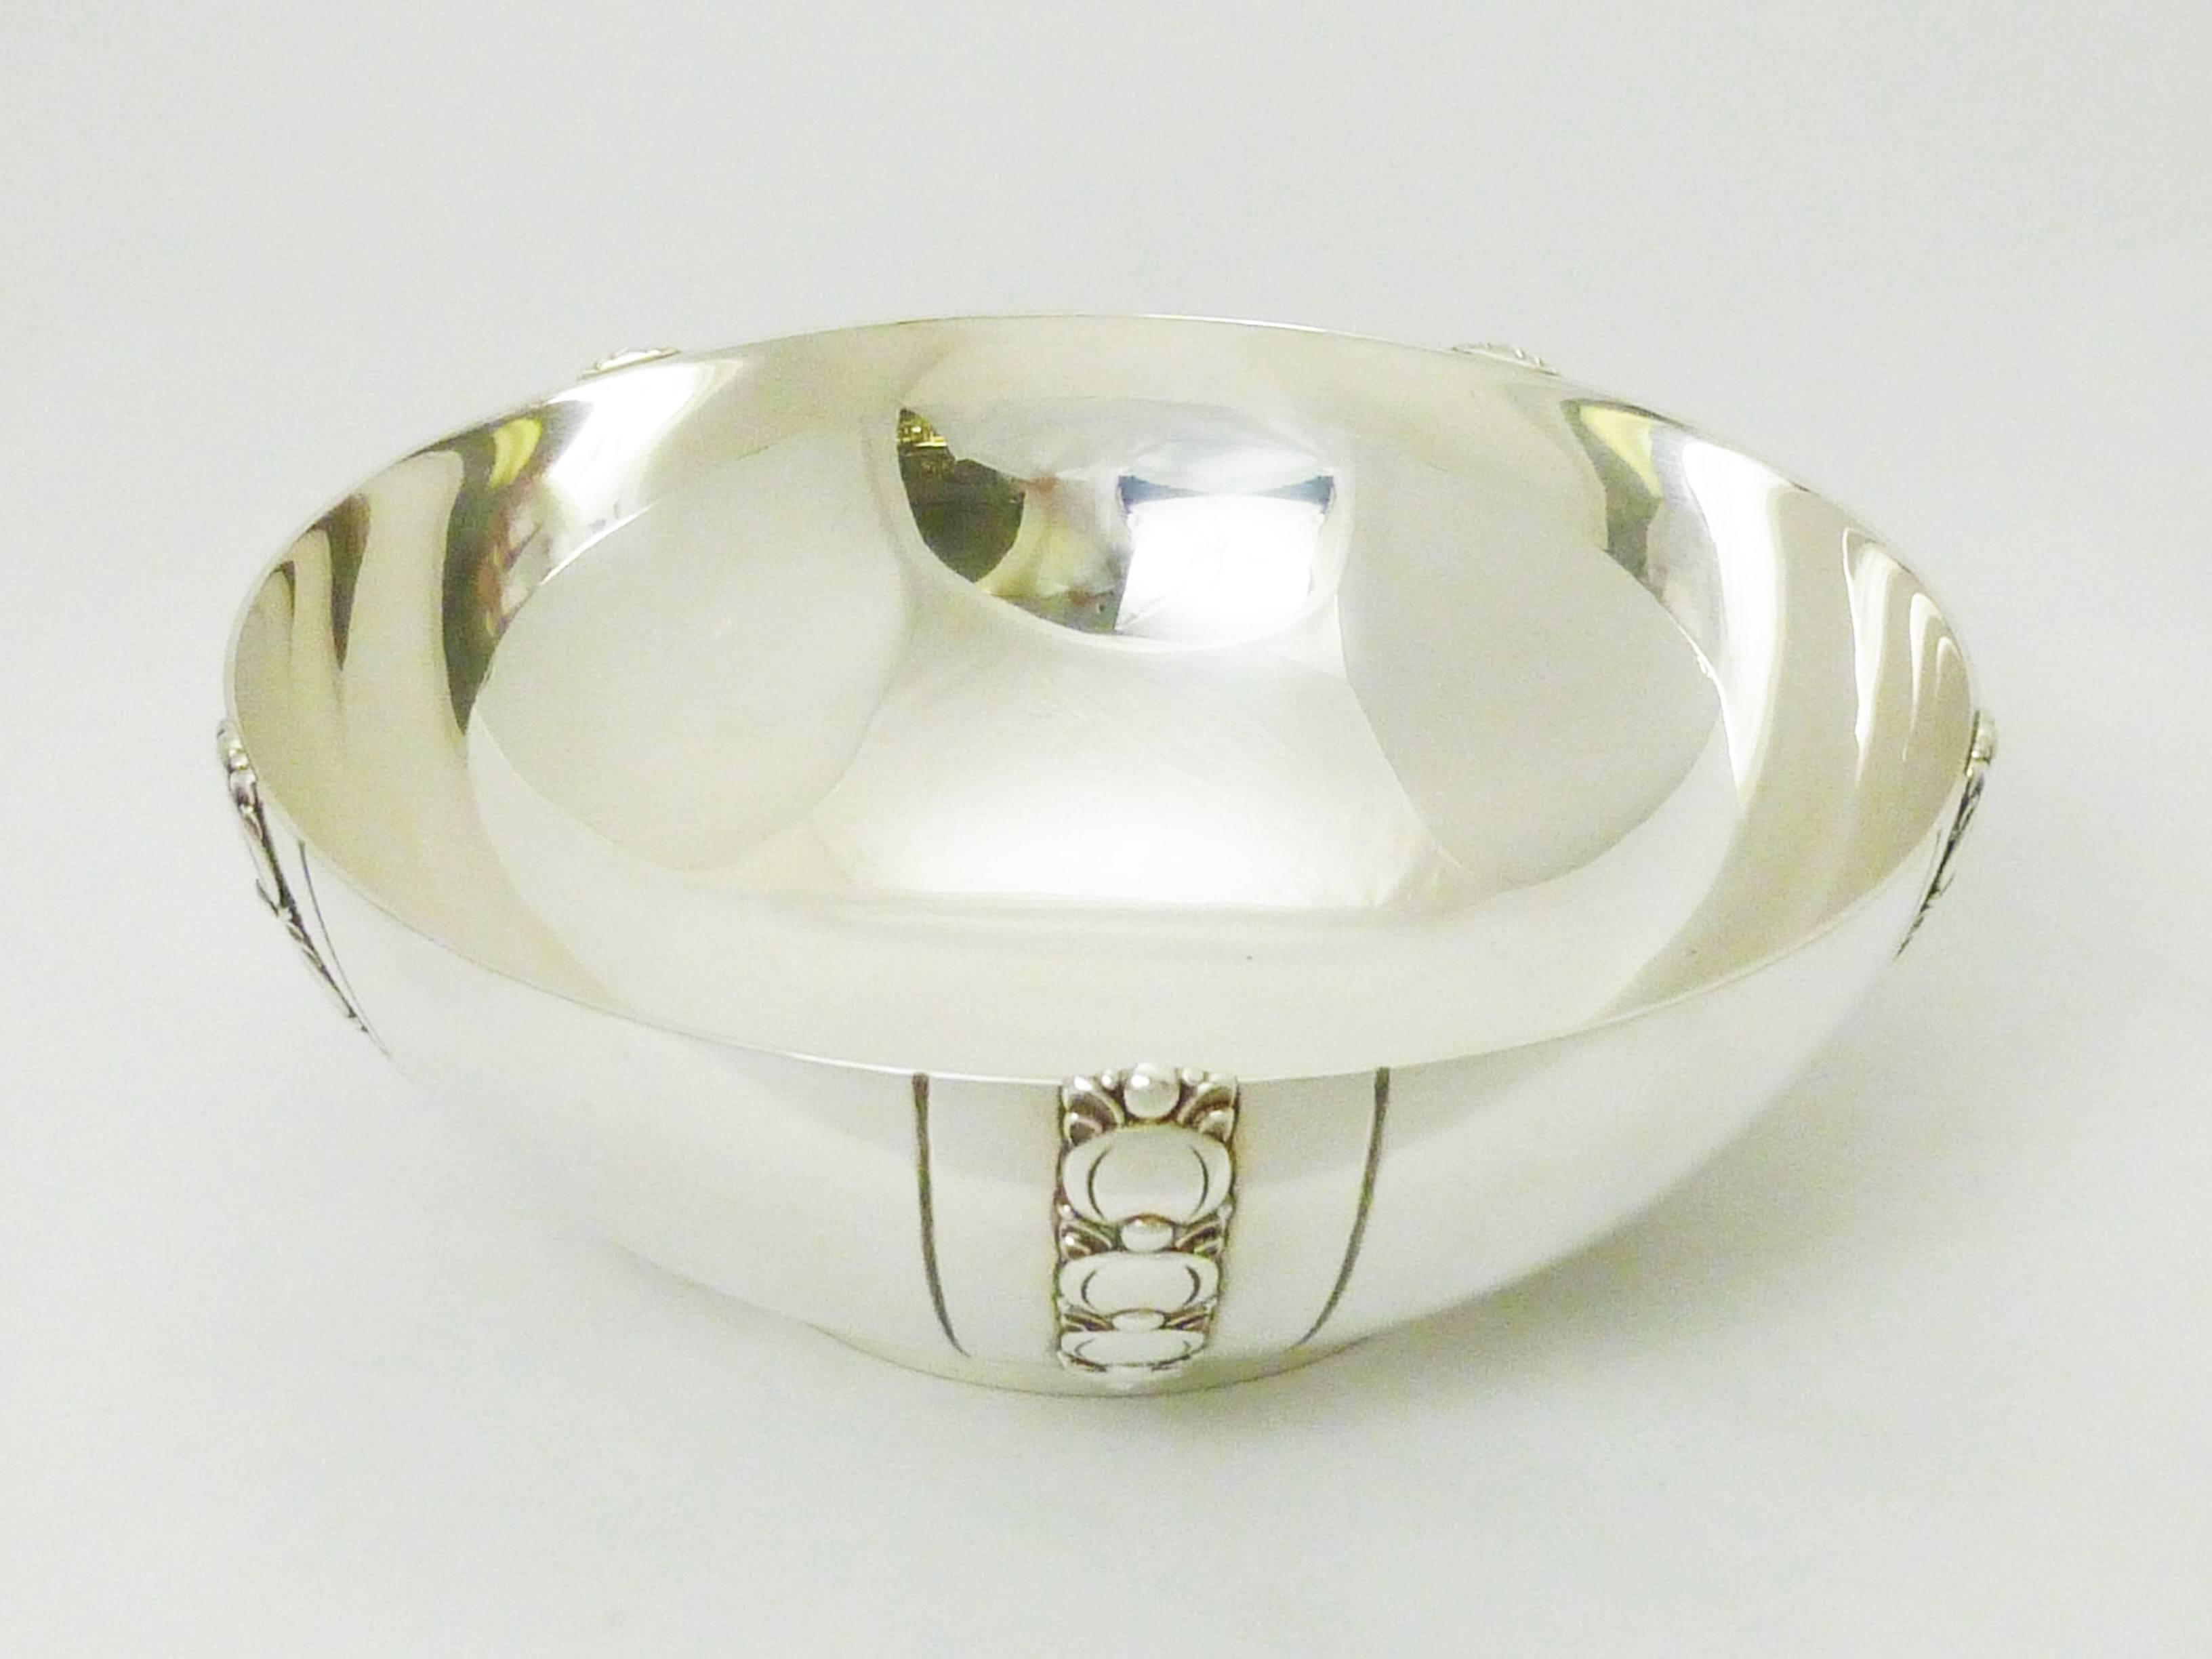 Tiffany & Co. Sterling Silver Bowl, Underplate and Salad Serving Set For Sale 1